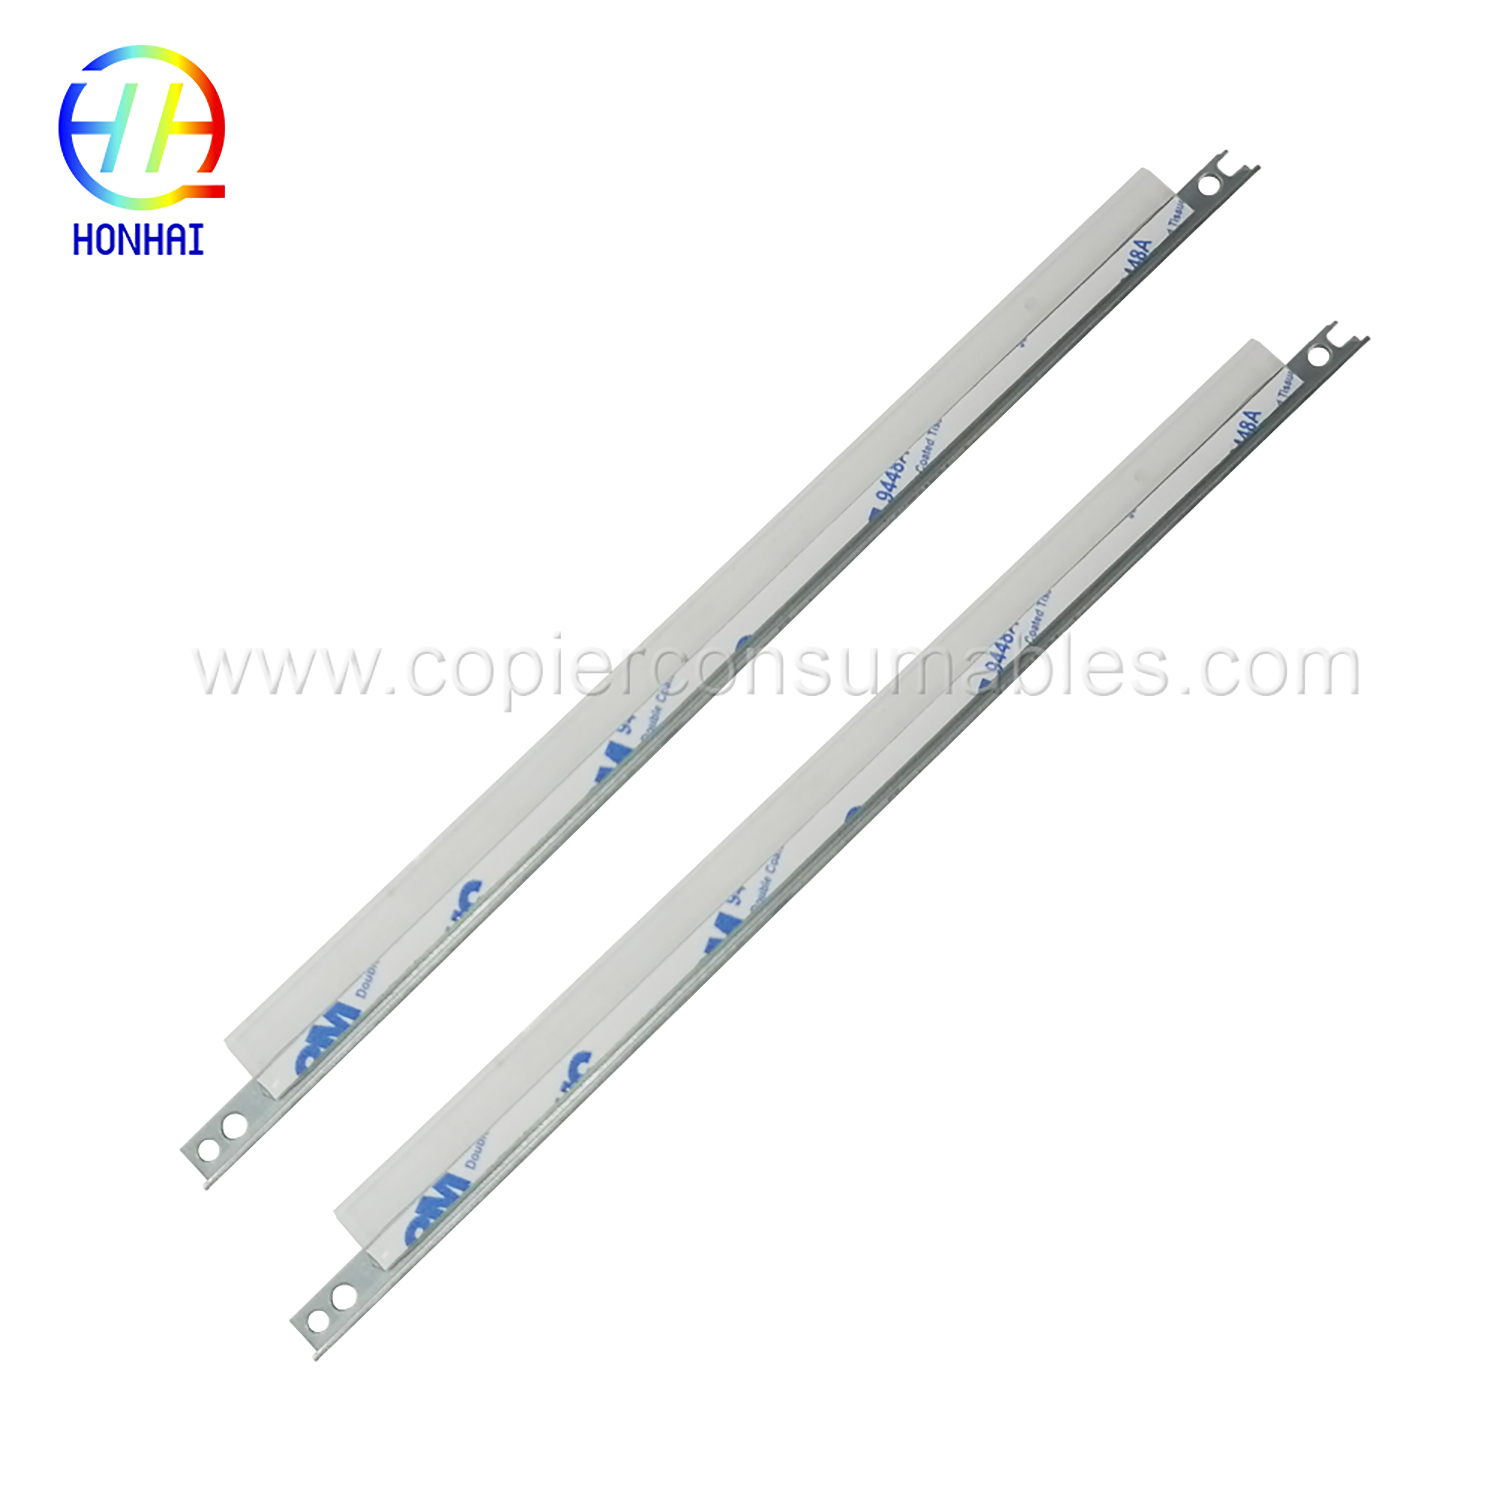 Drum cleaning blade for HP 1020 M1319 3015 3020 3030 3052 3050 3055 1010 1020 1022 M1005 (4) 拷贝